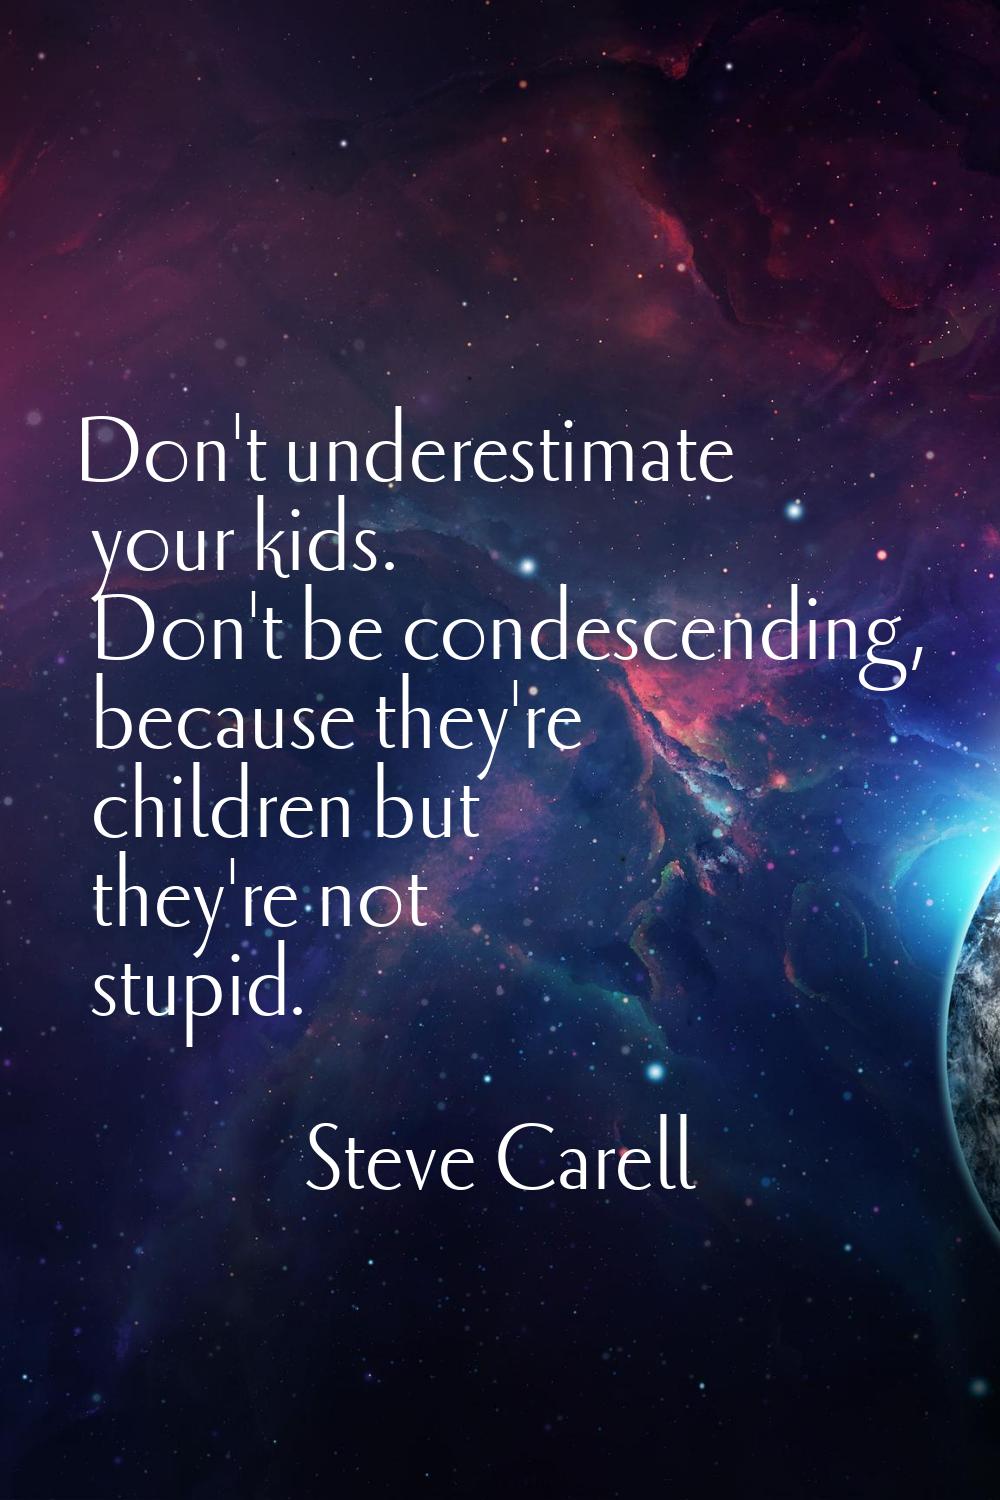 Don't underestimate your kids. Don't be condescending, because they're children but they're not stu